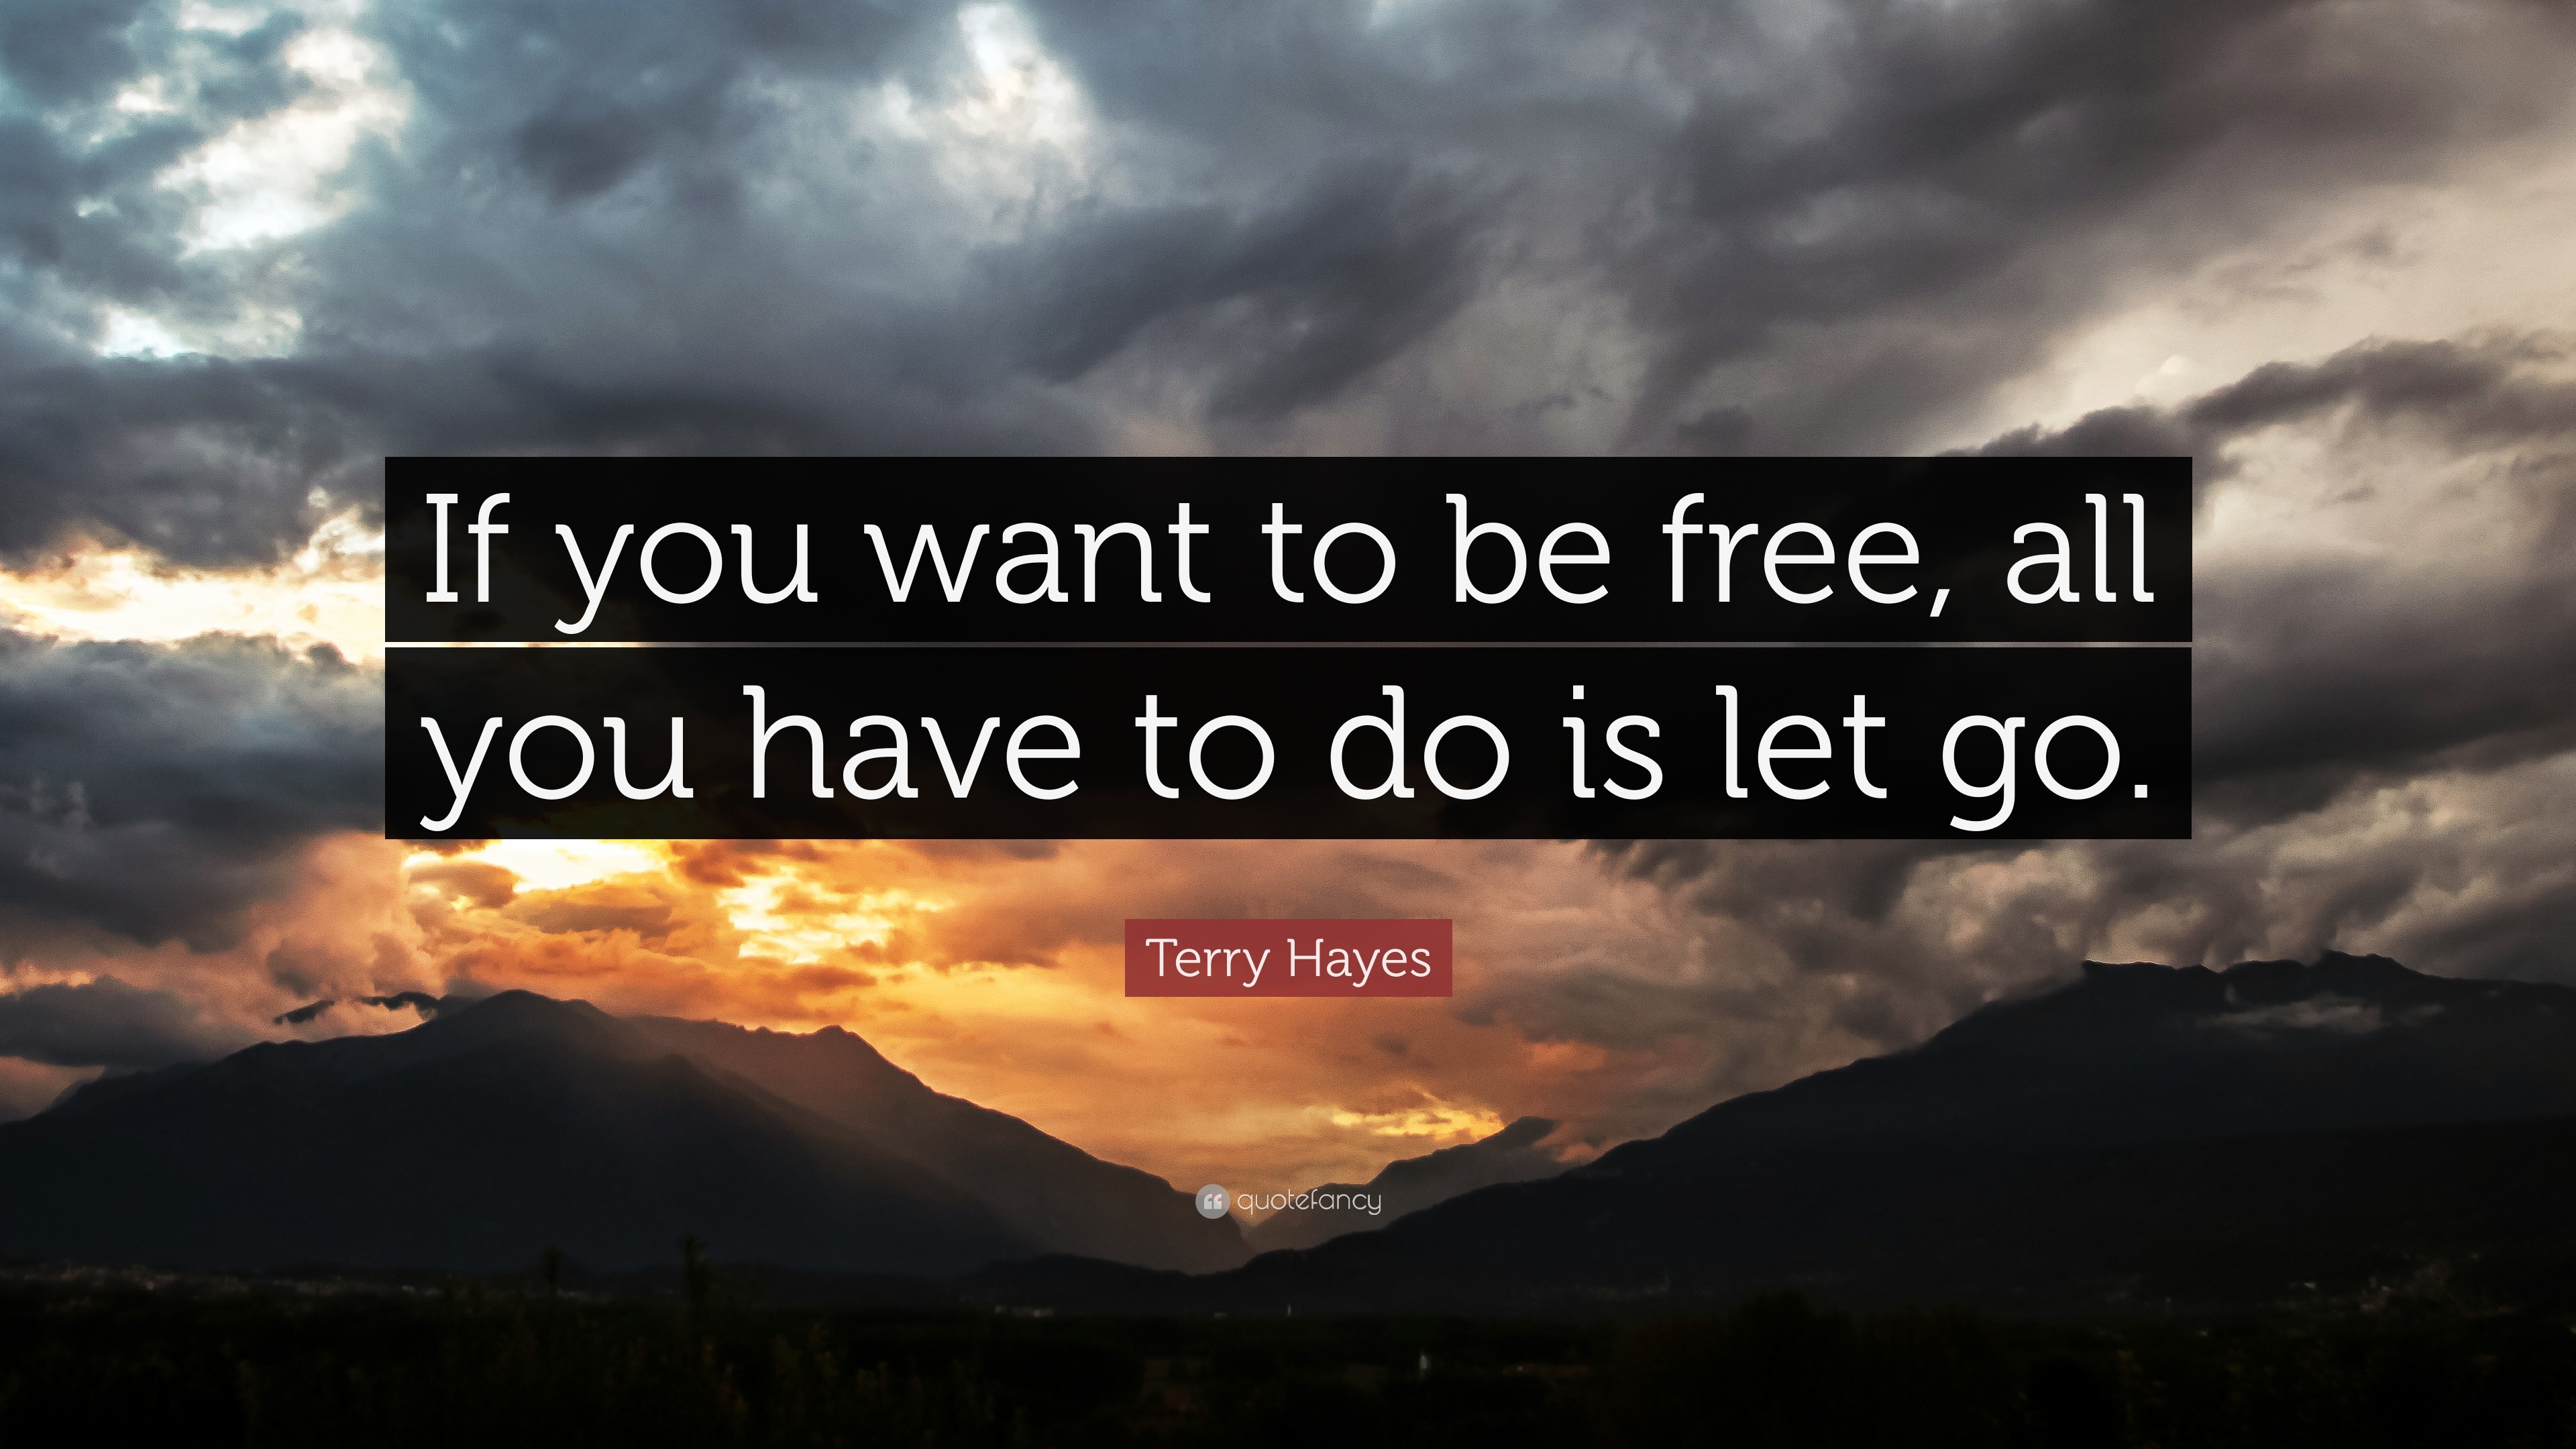 Quotes 'nd Notes - To be free you have to let go. —via